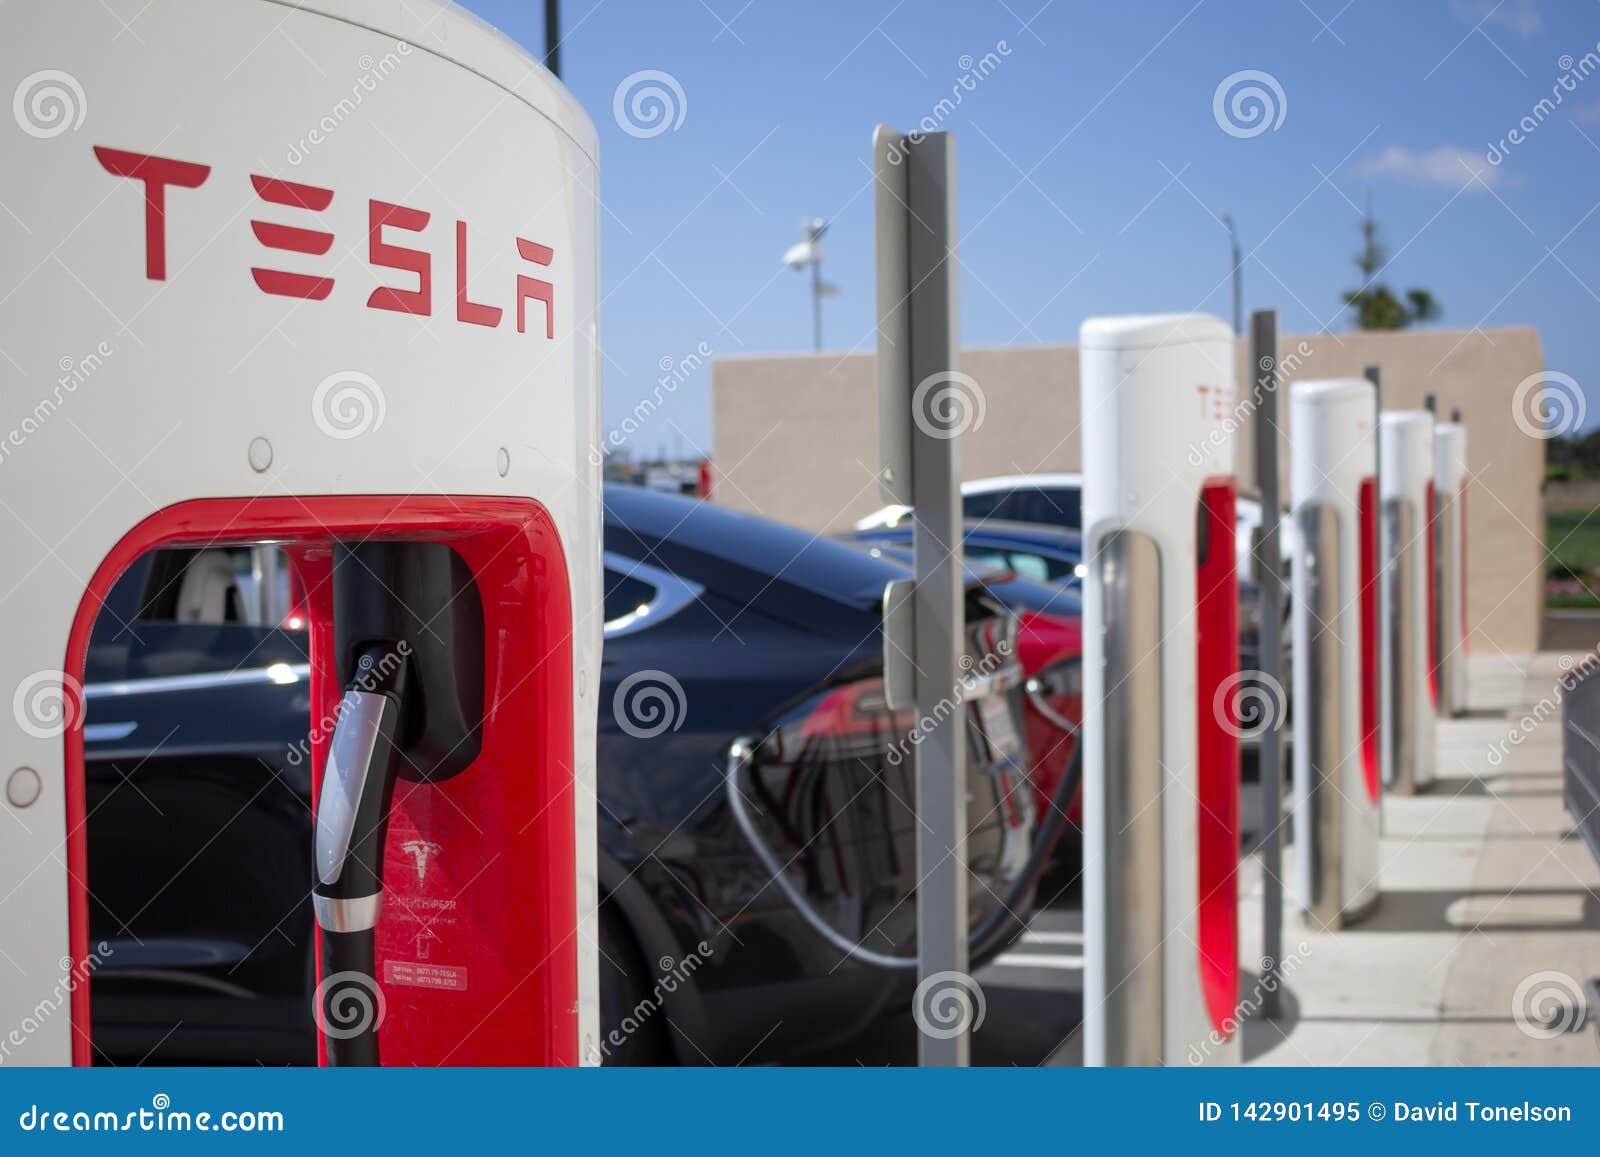 tesla charging station pumps tesla supercharger station pumps tesla vehicles plugged fountain valley california image